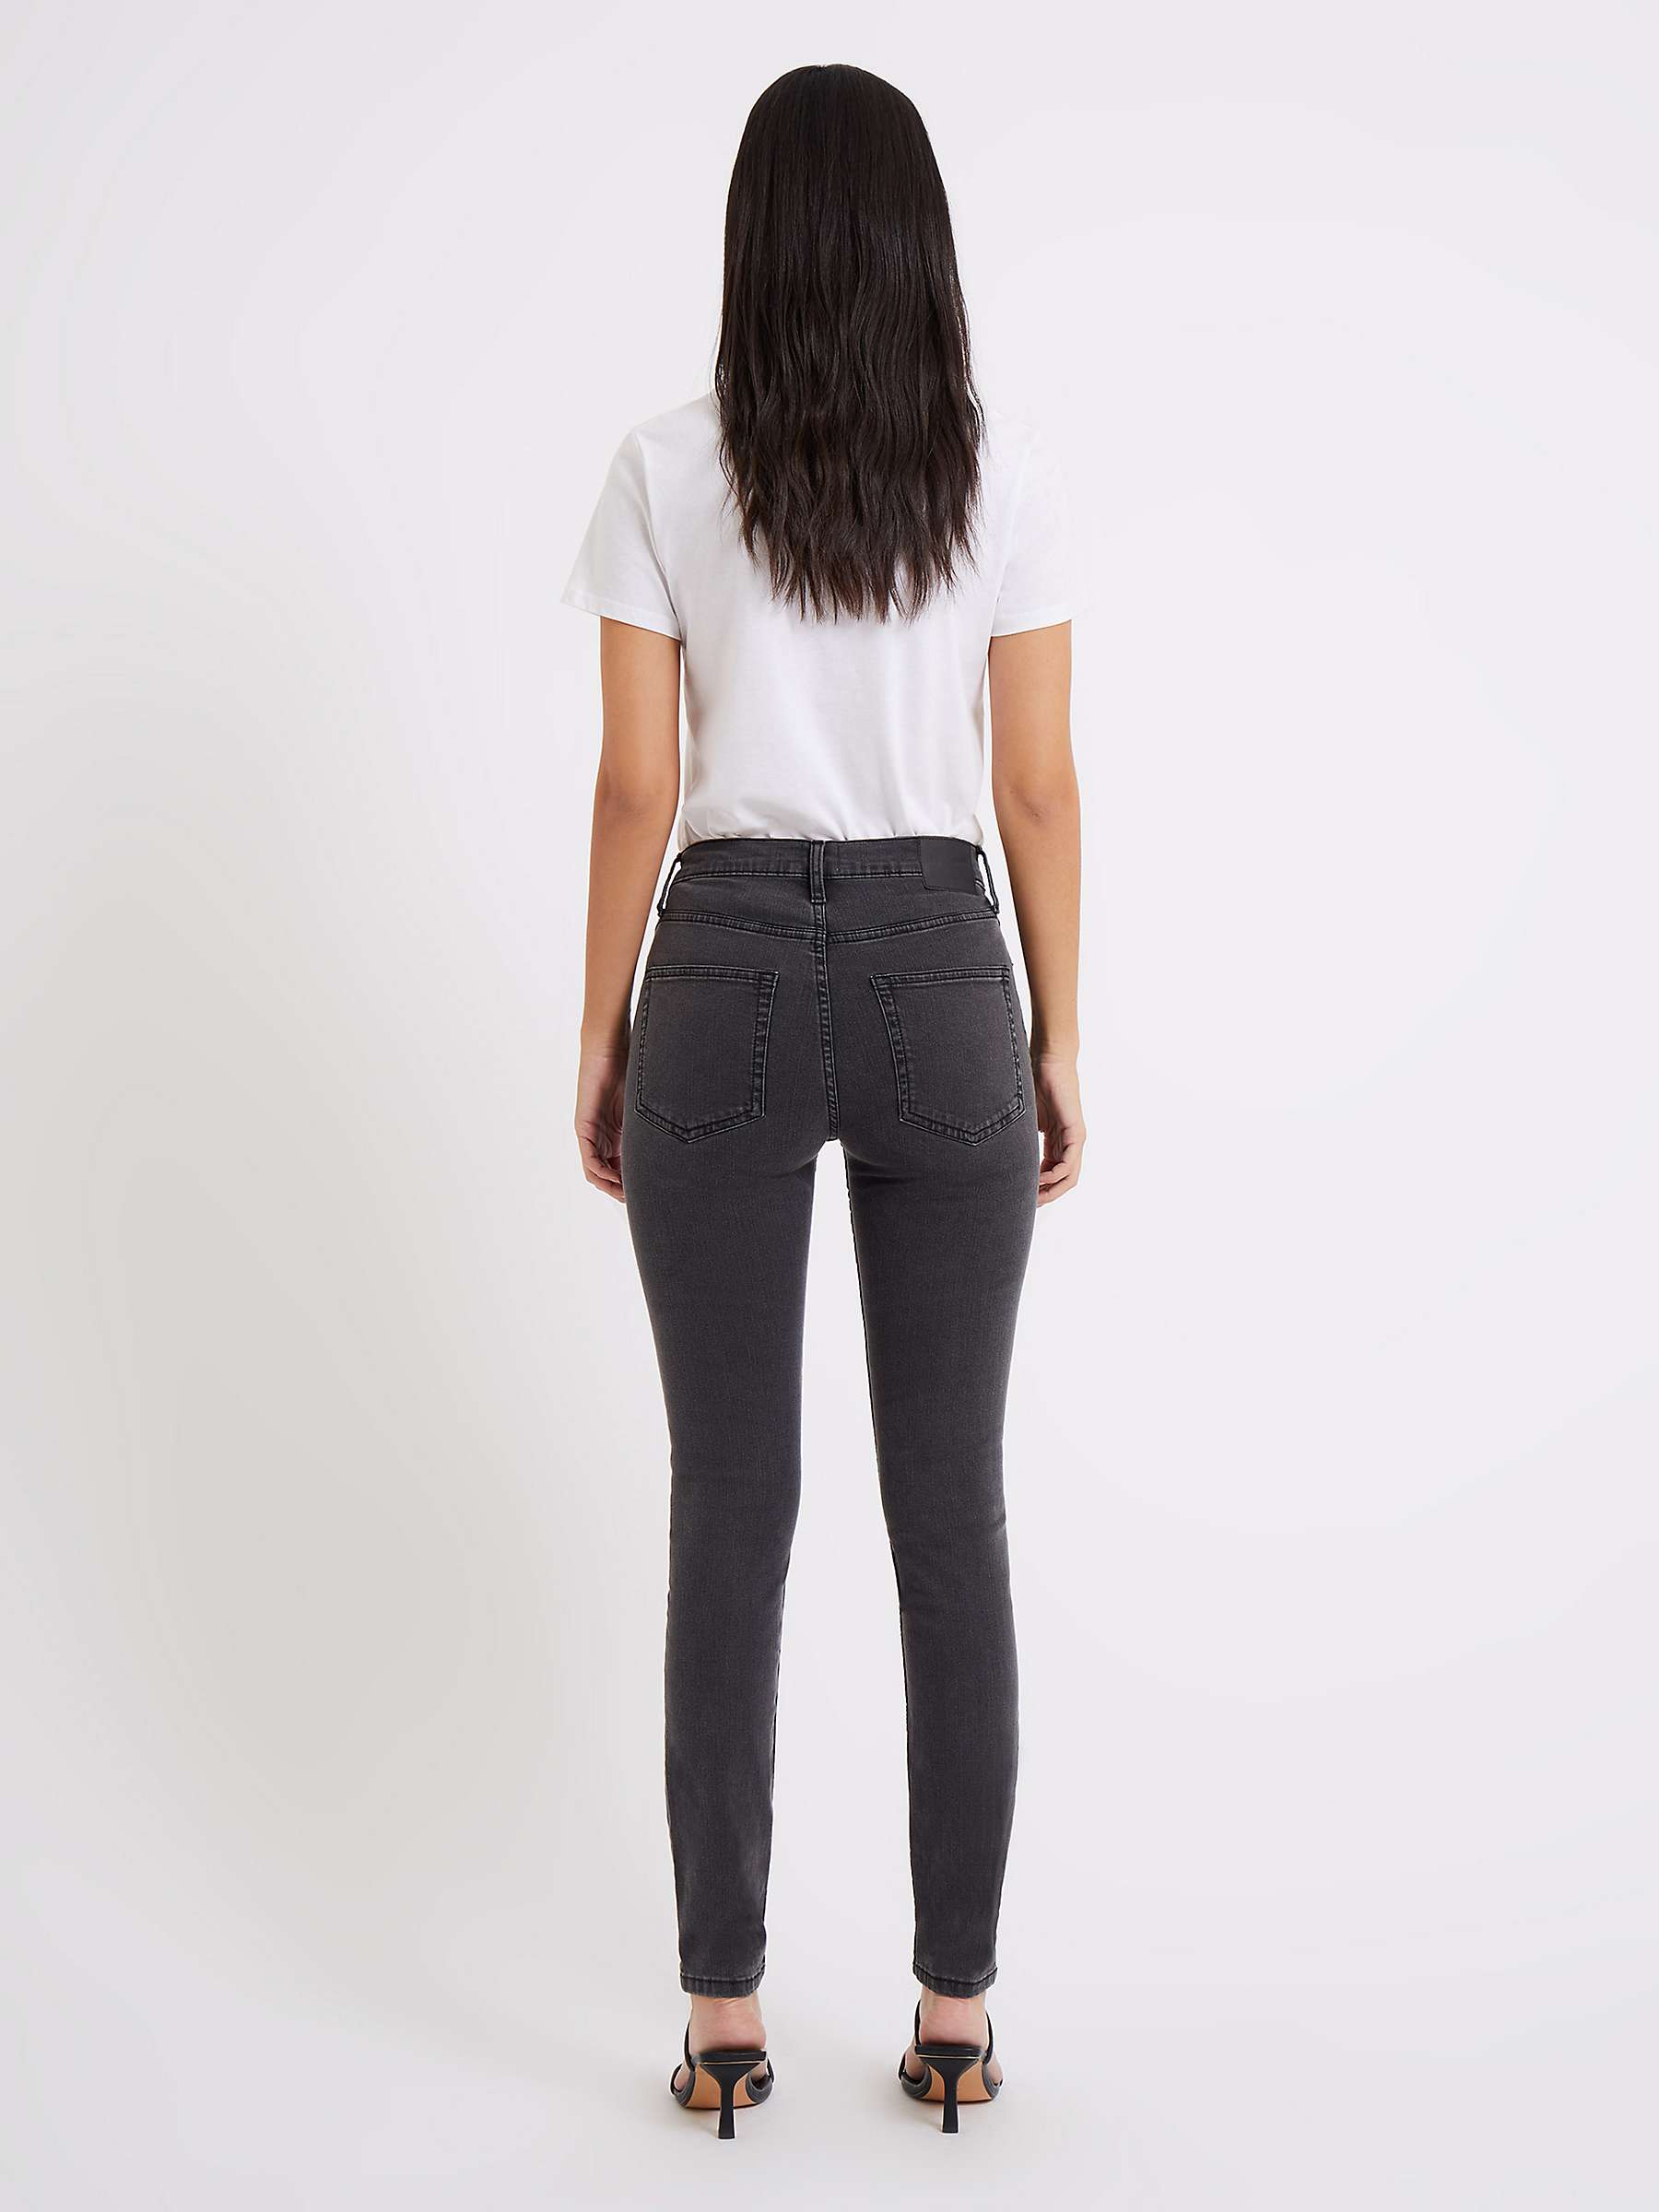 French Connection Rebound Response Skinny Jeans, Charcoal at John Lewis ...